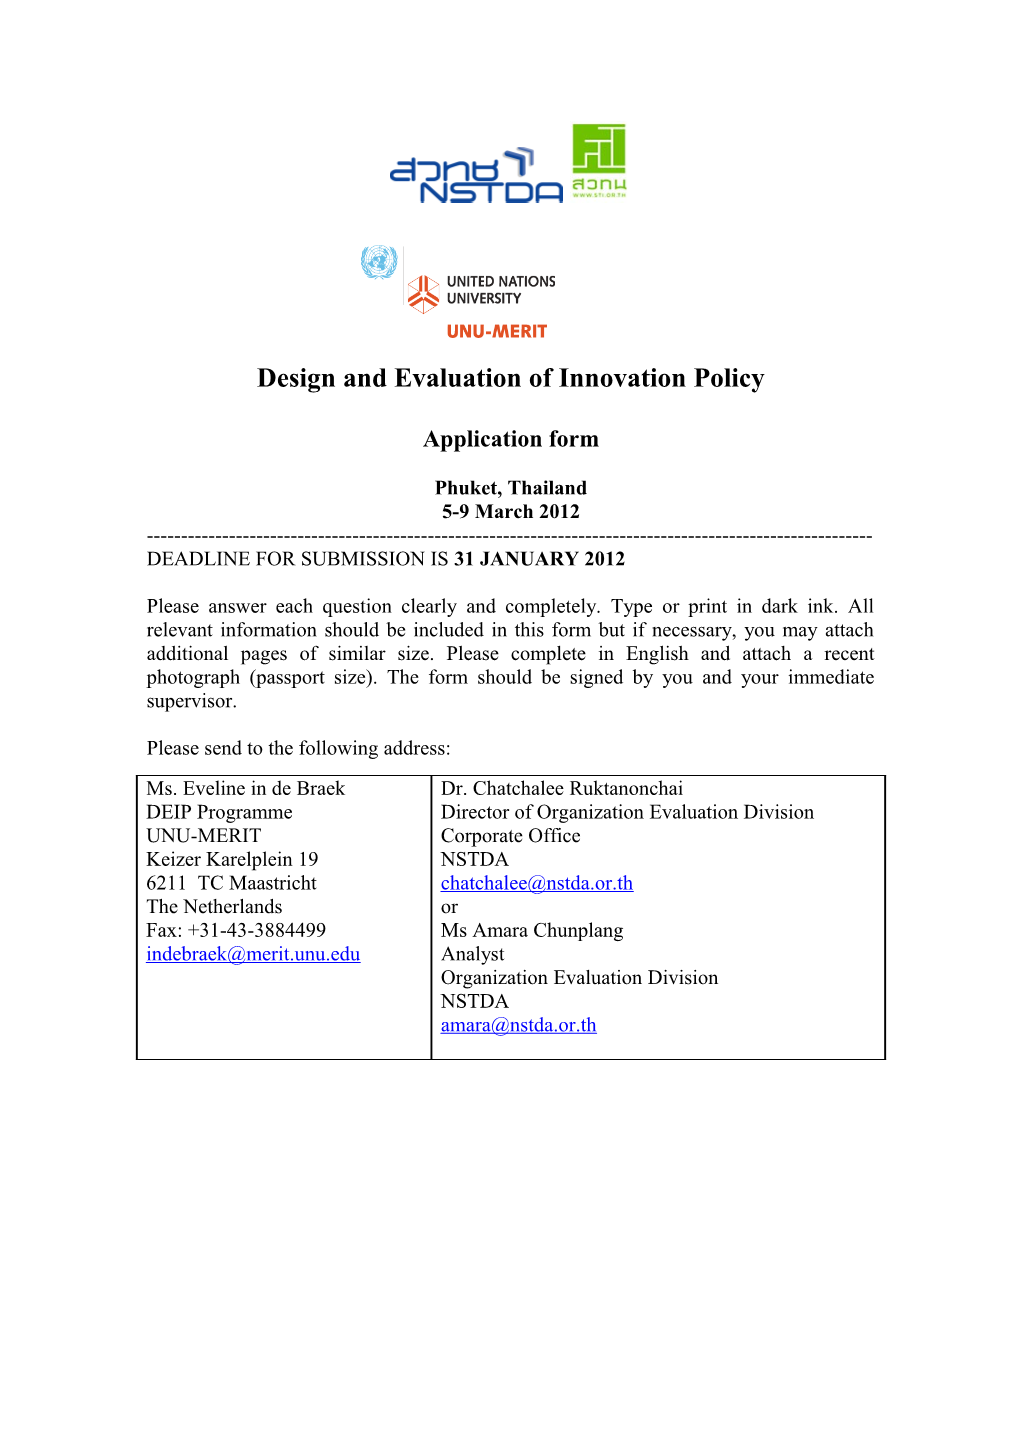 Design and Evaluation of Innovation Policies Application Form